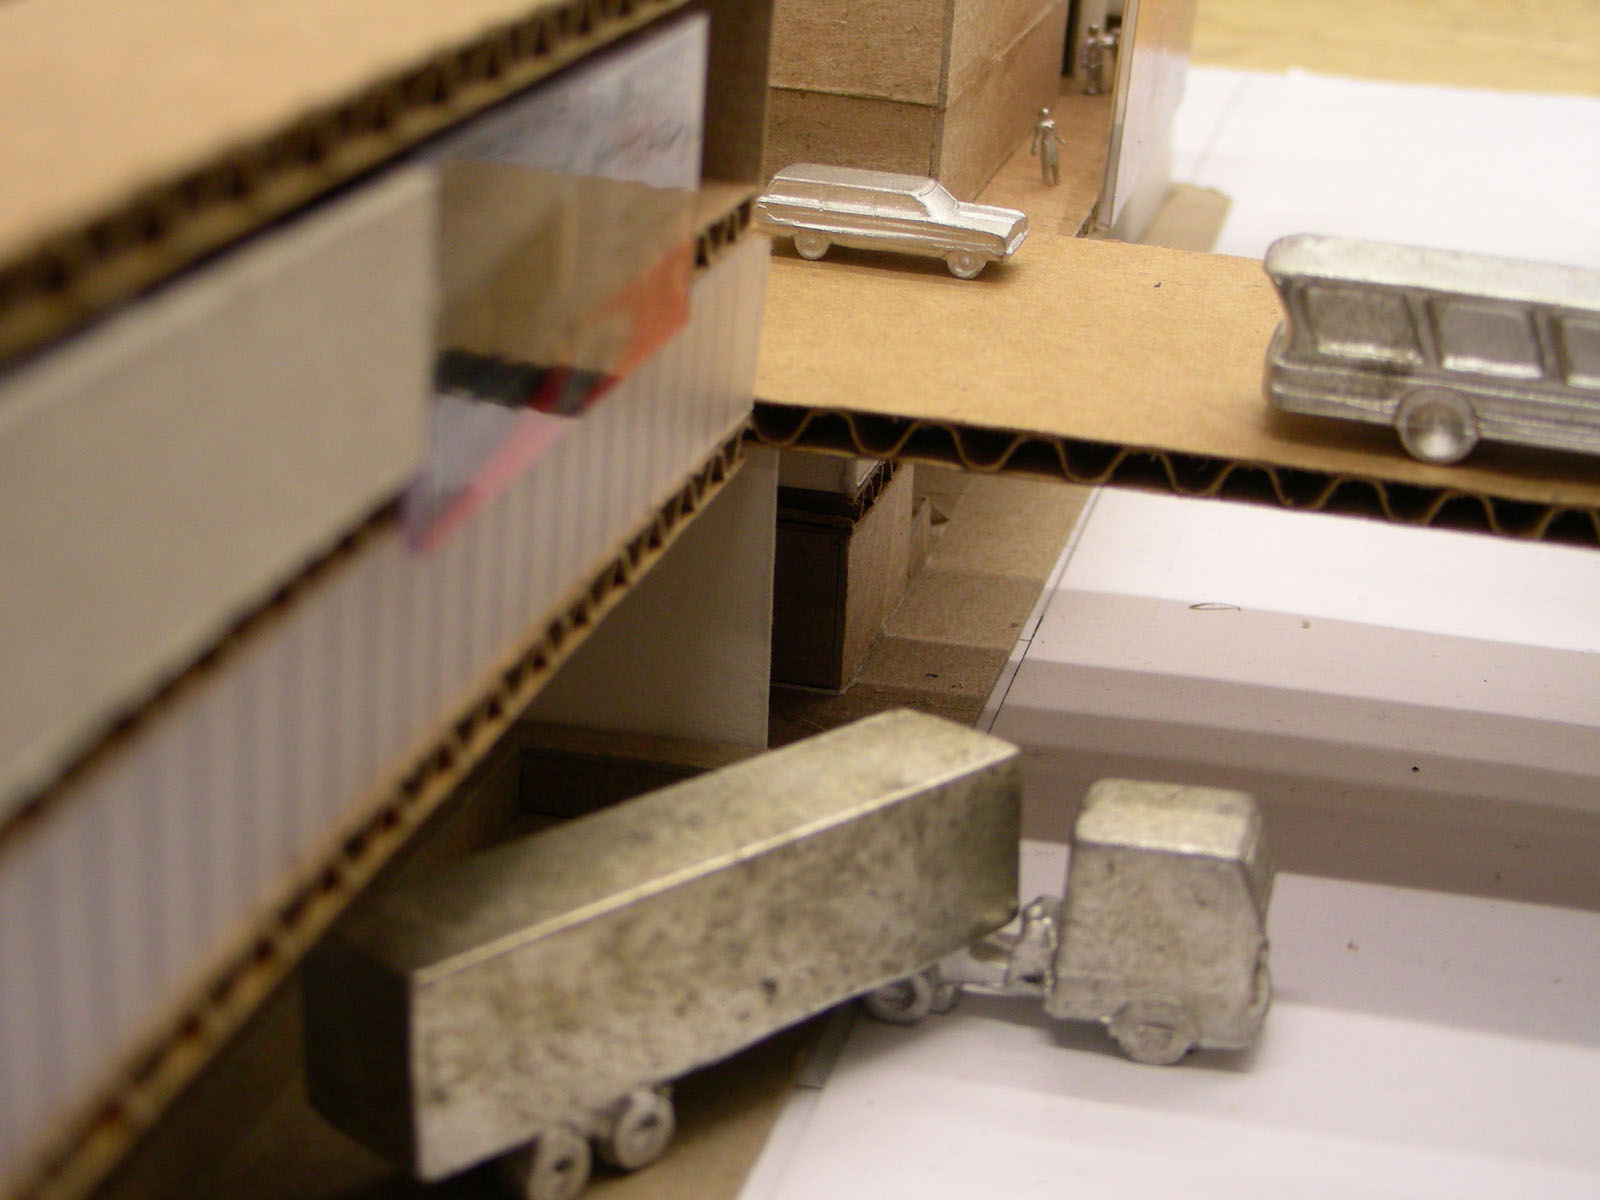 a model truck sits beside some boxes and a ruler